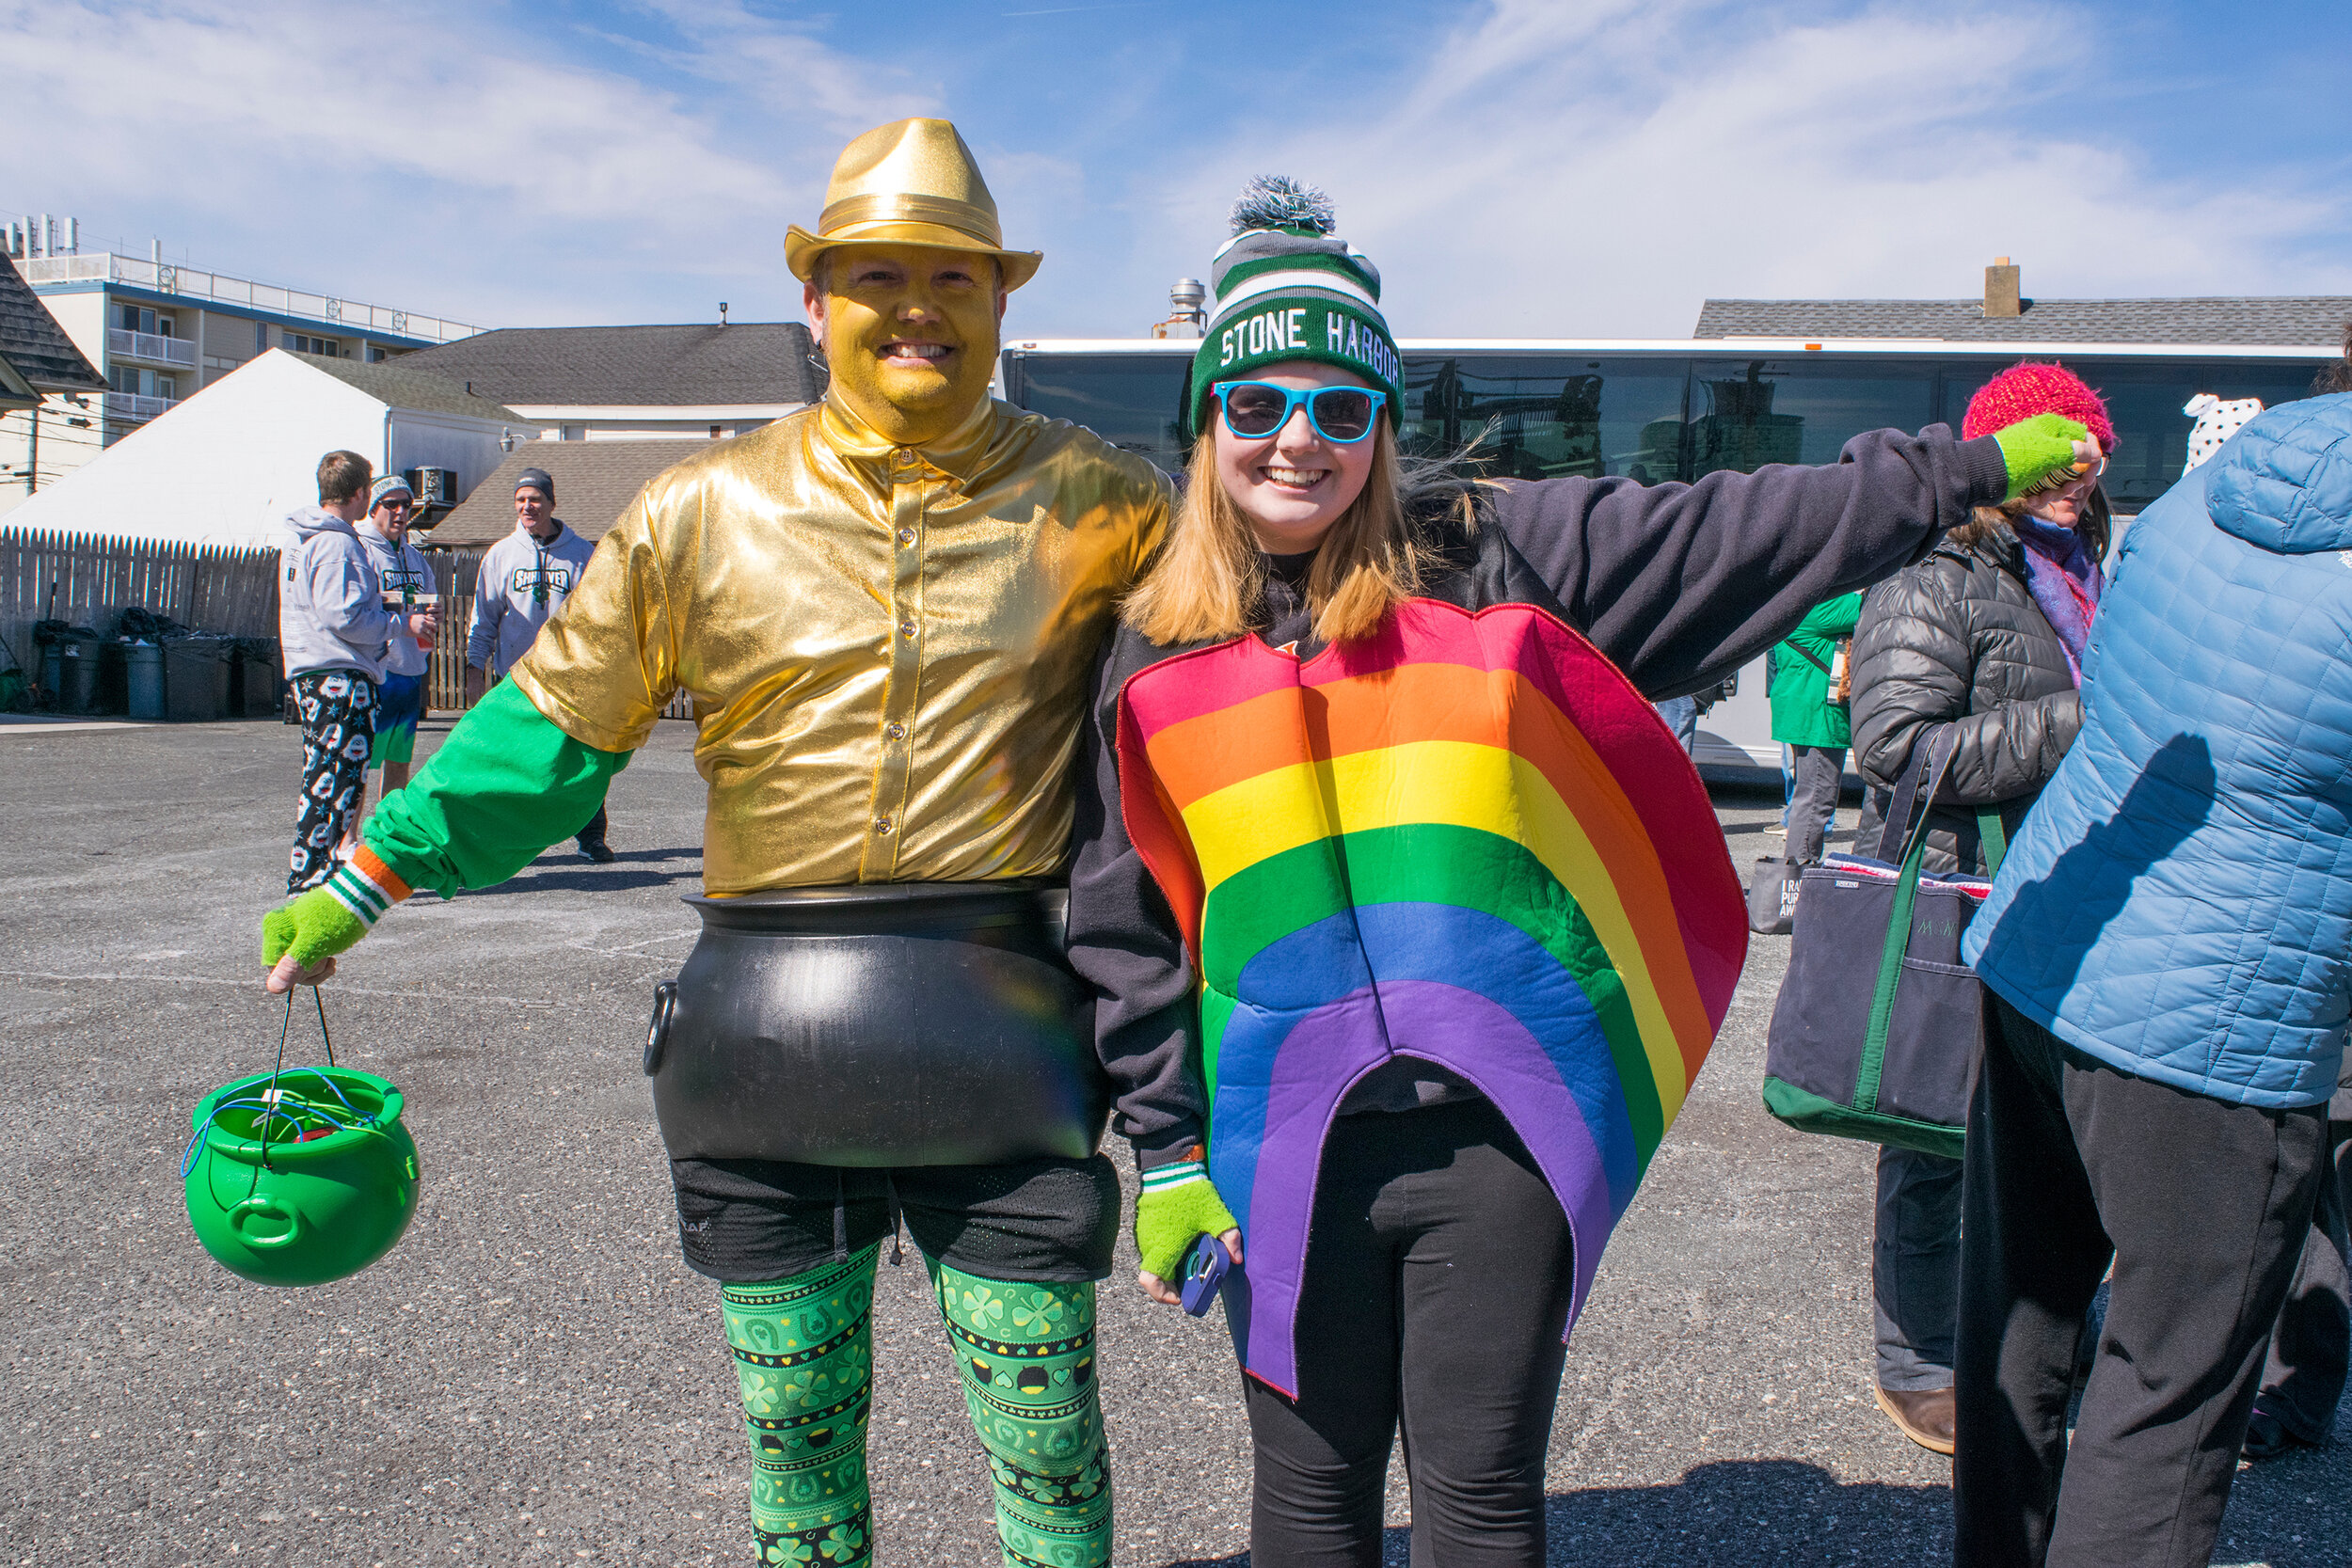 Best Name winners, “Pot O’ Gold” Anthony and Gwen Schaefer.